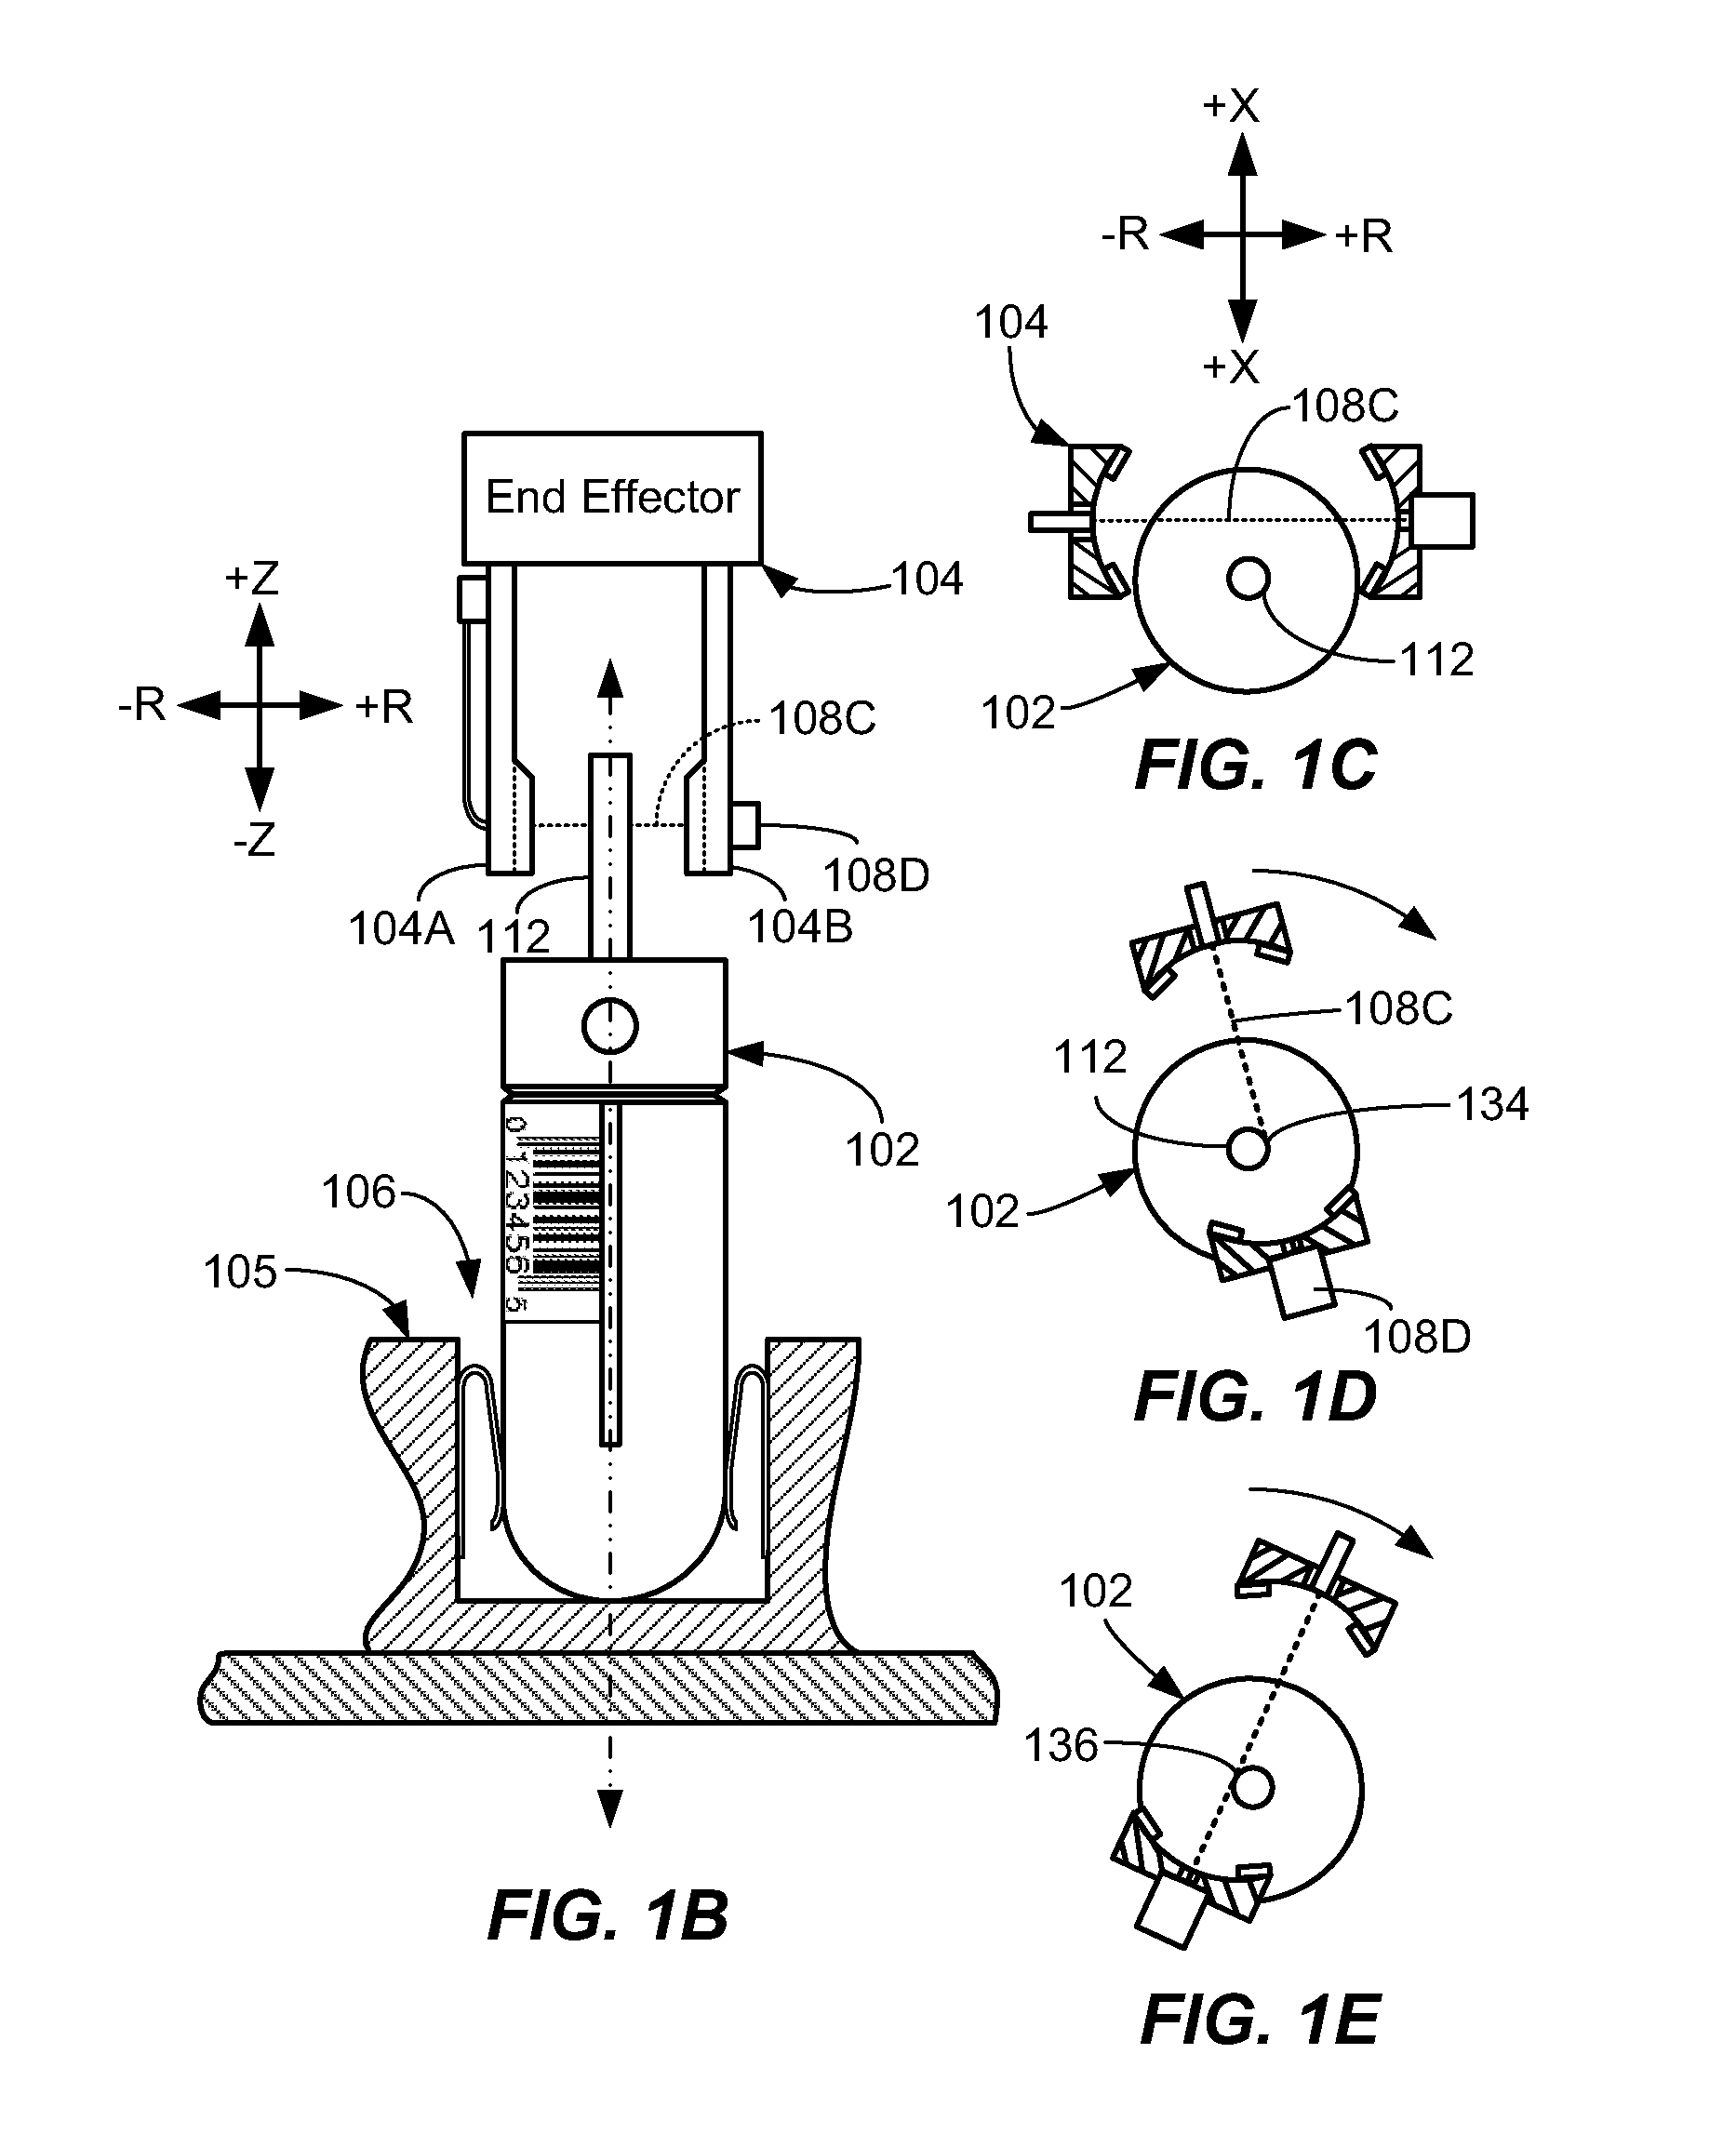 Methods, systems, and apparatus for calibration of an orientation between an end effector and an article